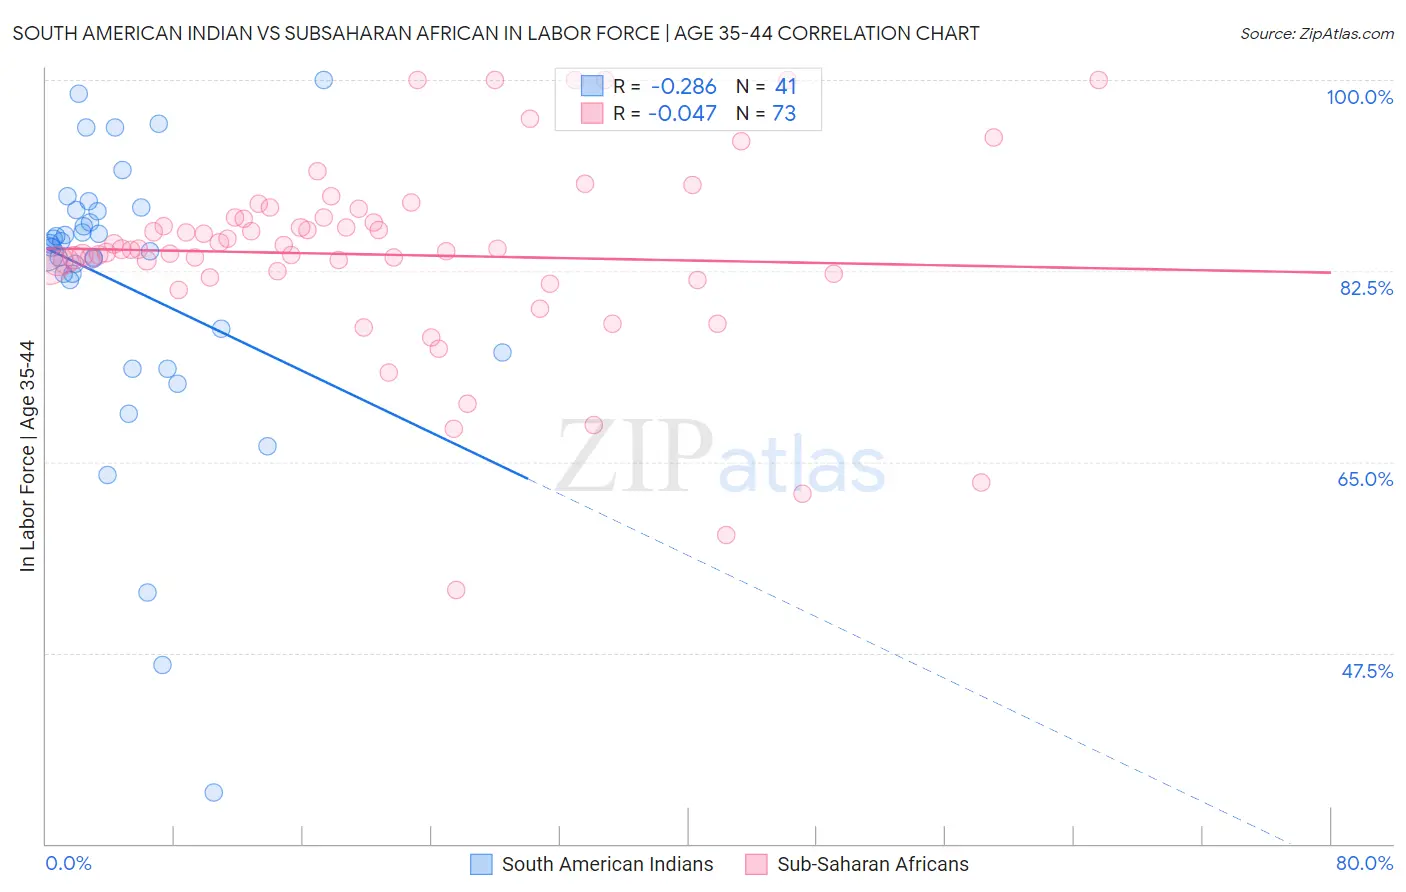 South American Indian vs Subsaharan African In Labor Force | Age 35-44